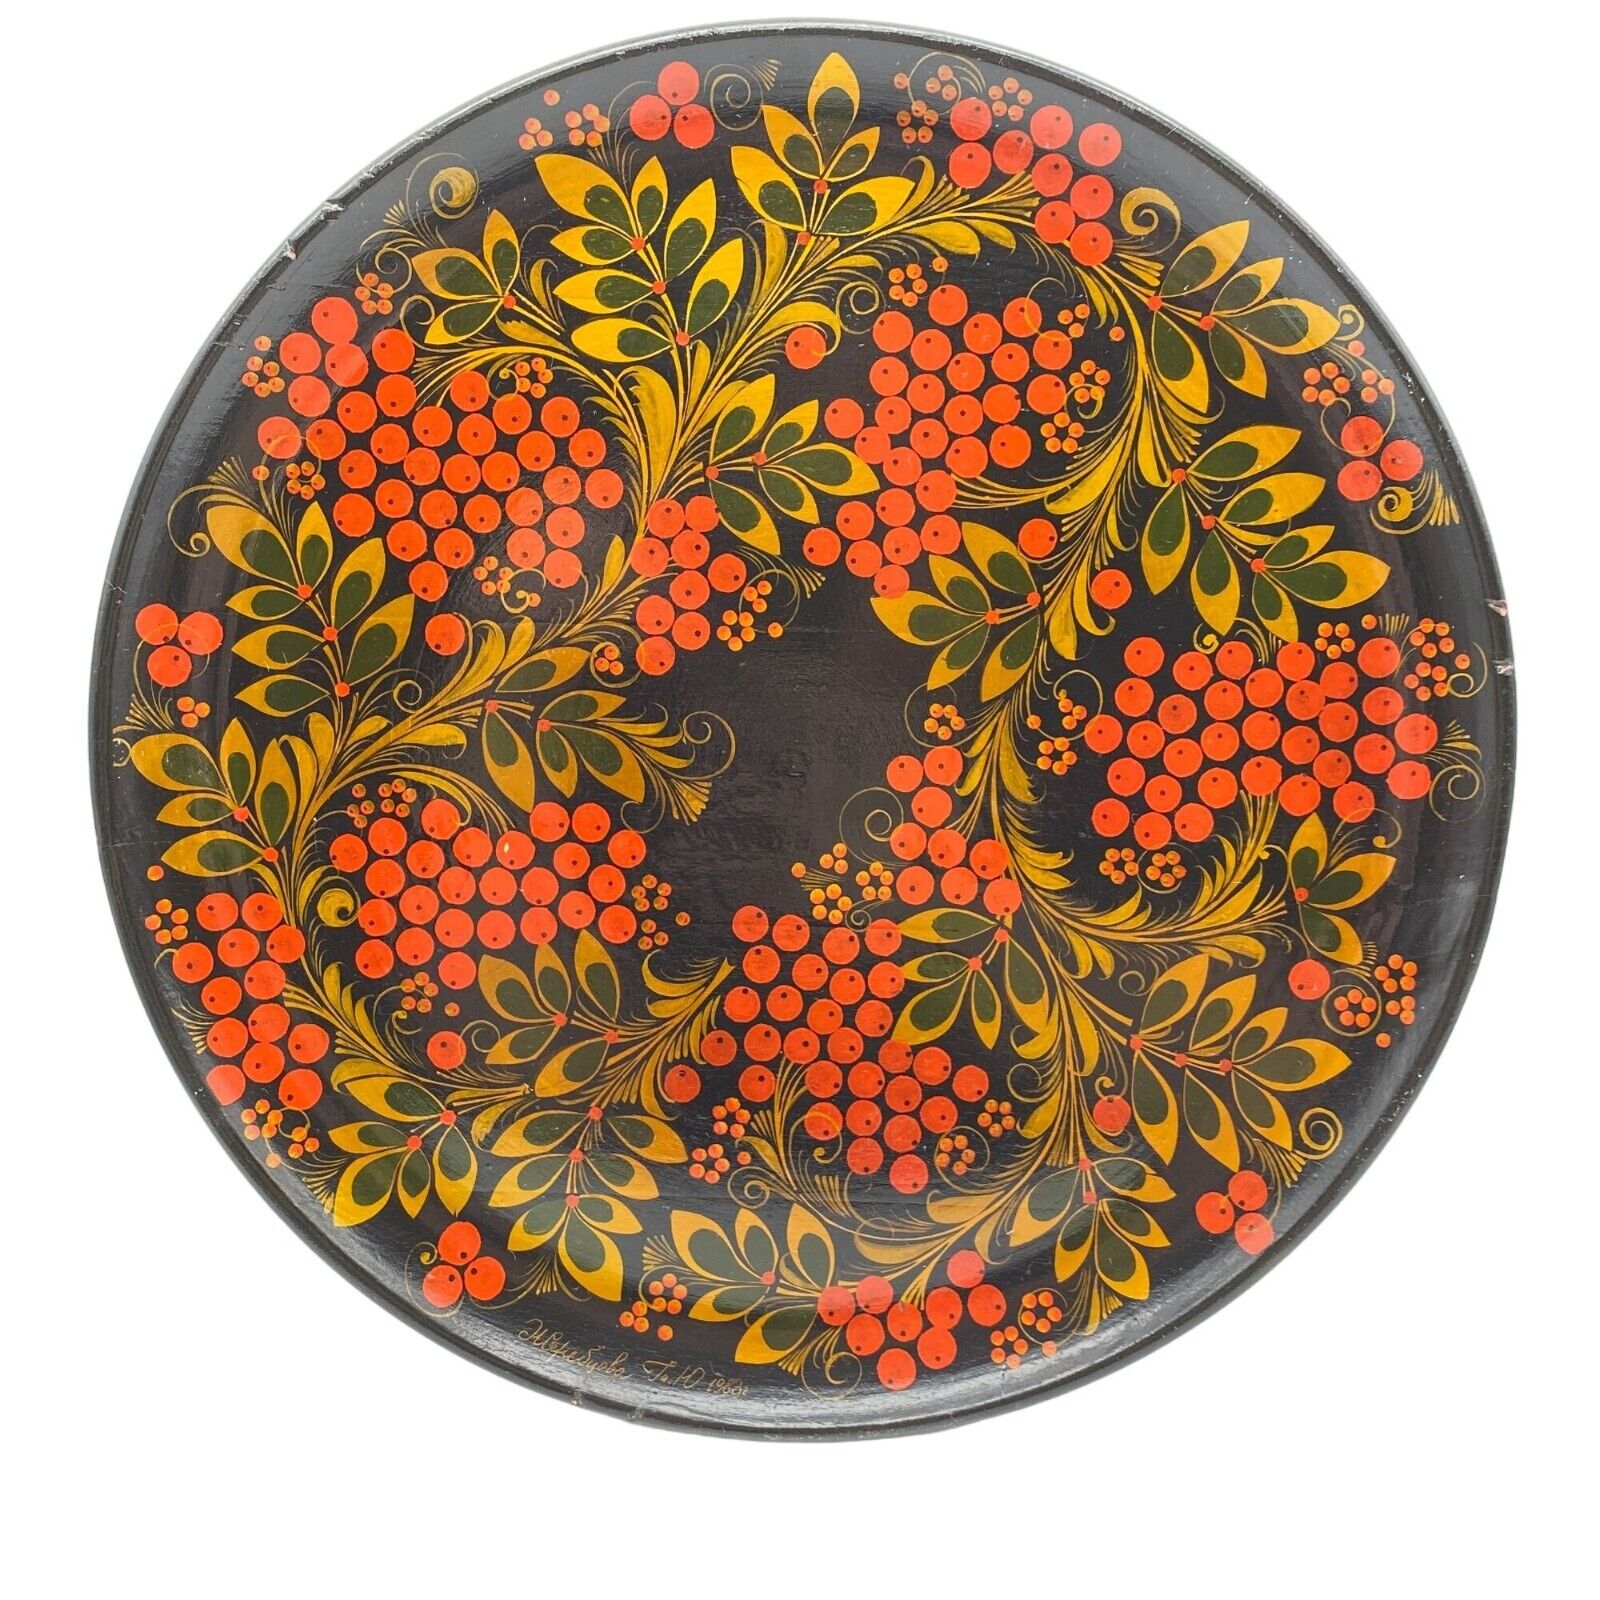 Russian Khokhloma wooden Plate serving tray Decorative hand painted wall plate